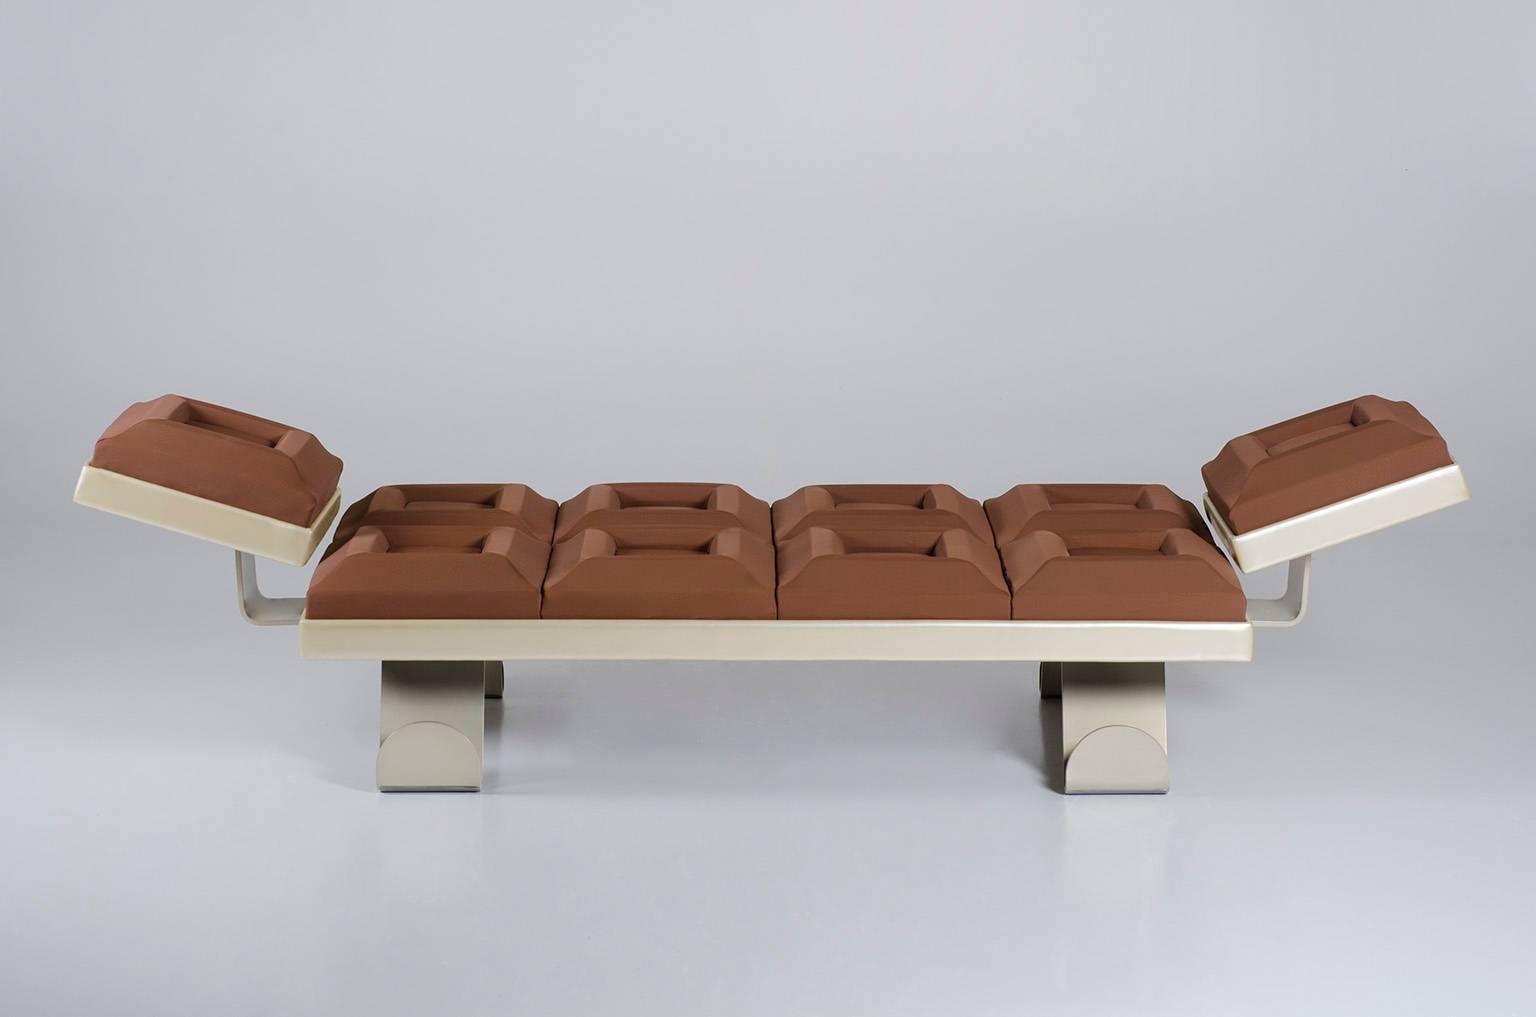 Chocolate will save the world.
By matching two or more squares, the food of the gods becomes a dream come true.
Benches, dormeuse, seating, sofas, comfortable chaise longues will fulfill the spaces and desires of every gourmet.
Powder-coated